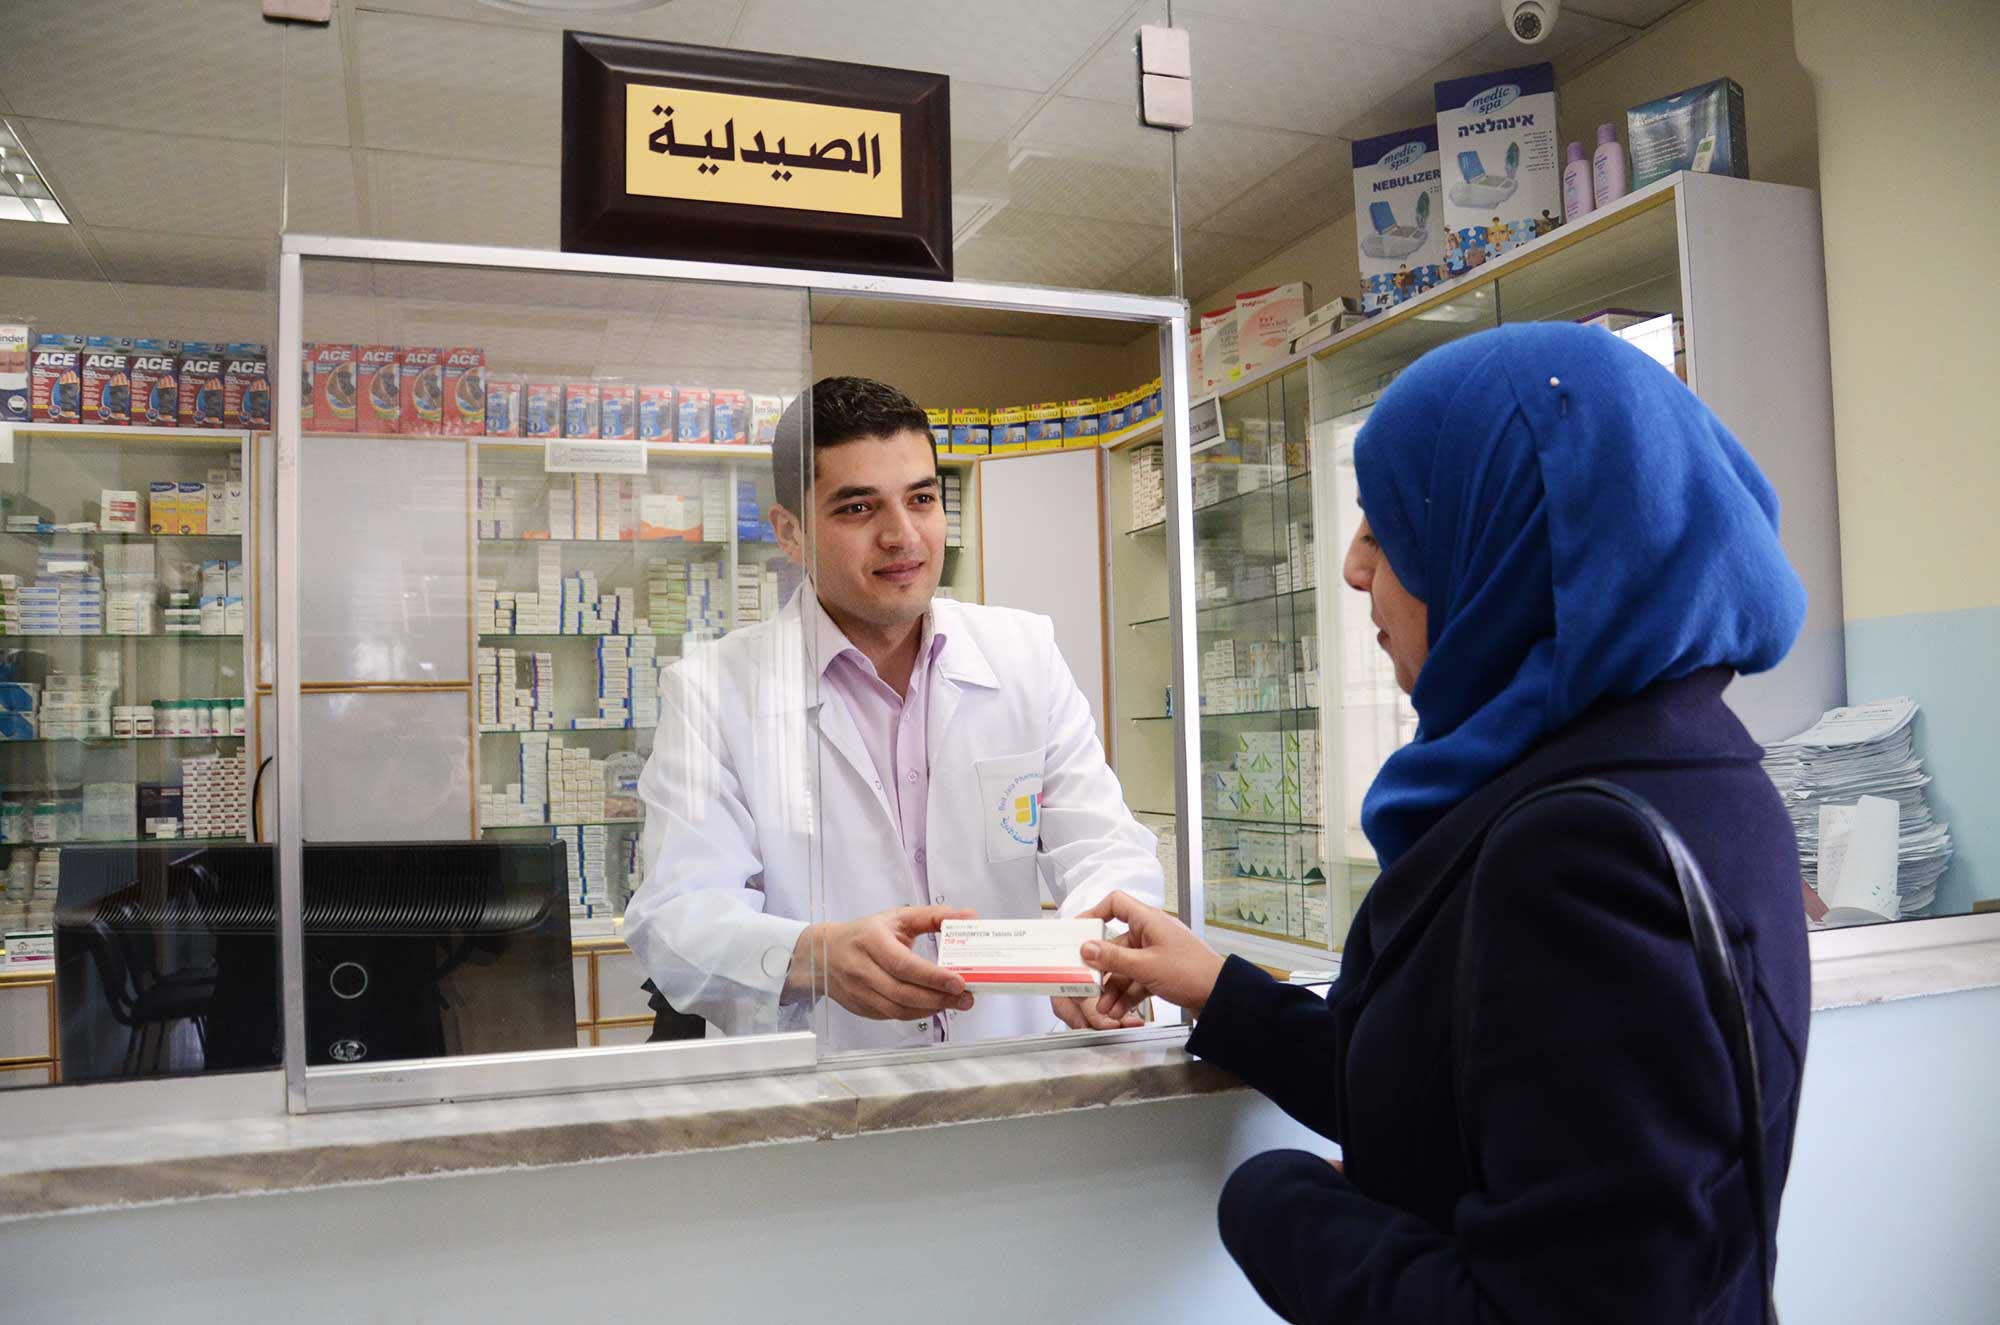 Palestine health care relies on in-kind donations to pharmacies and clinics.